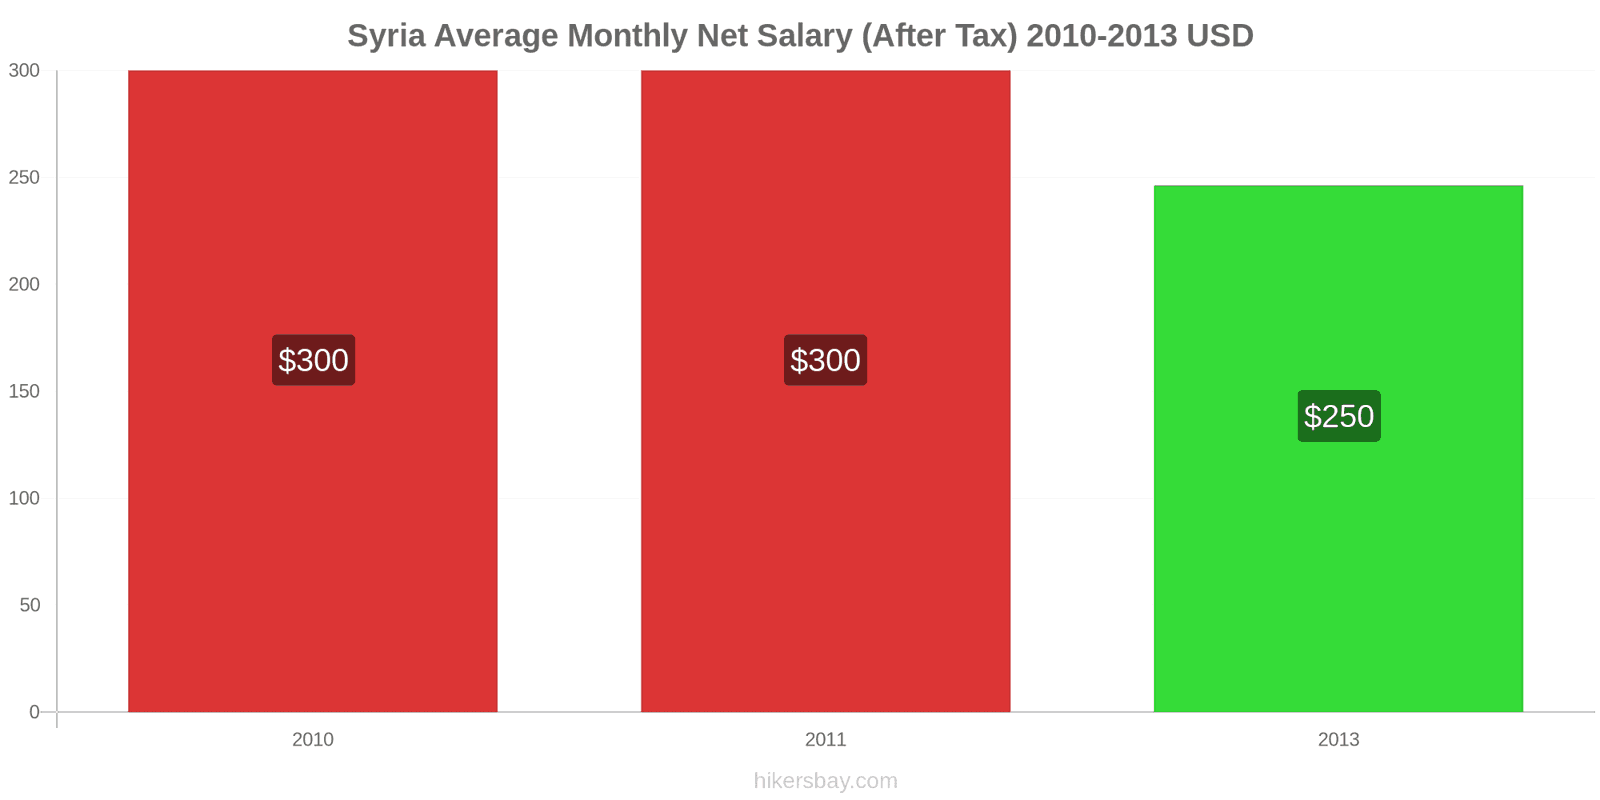 Syria price changes Average Monthly Net Salary (After Tax) hikersbay.com